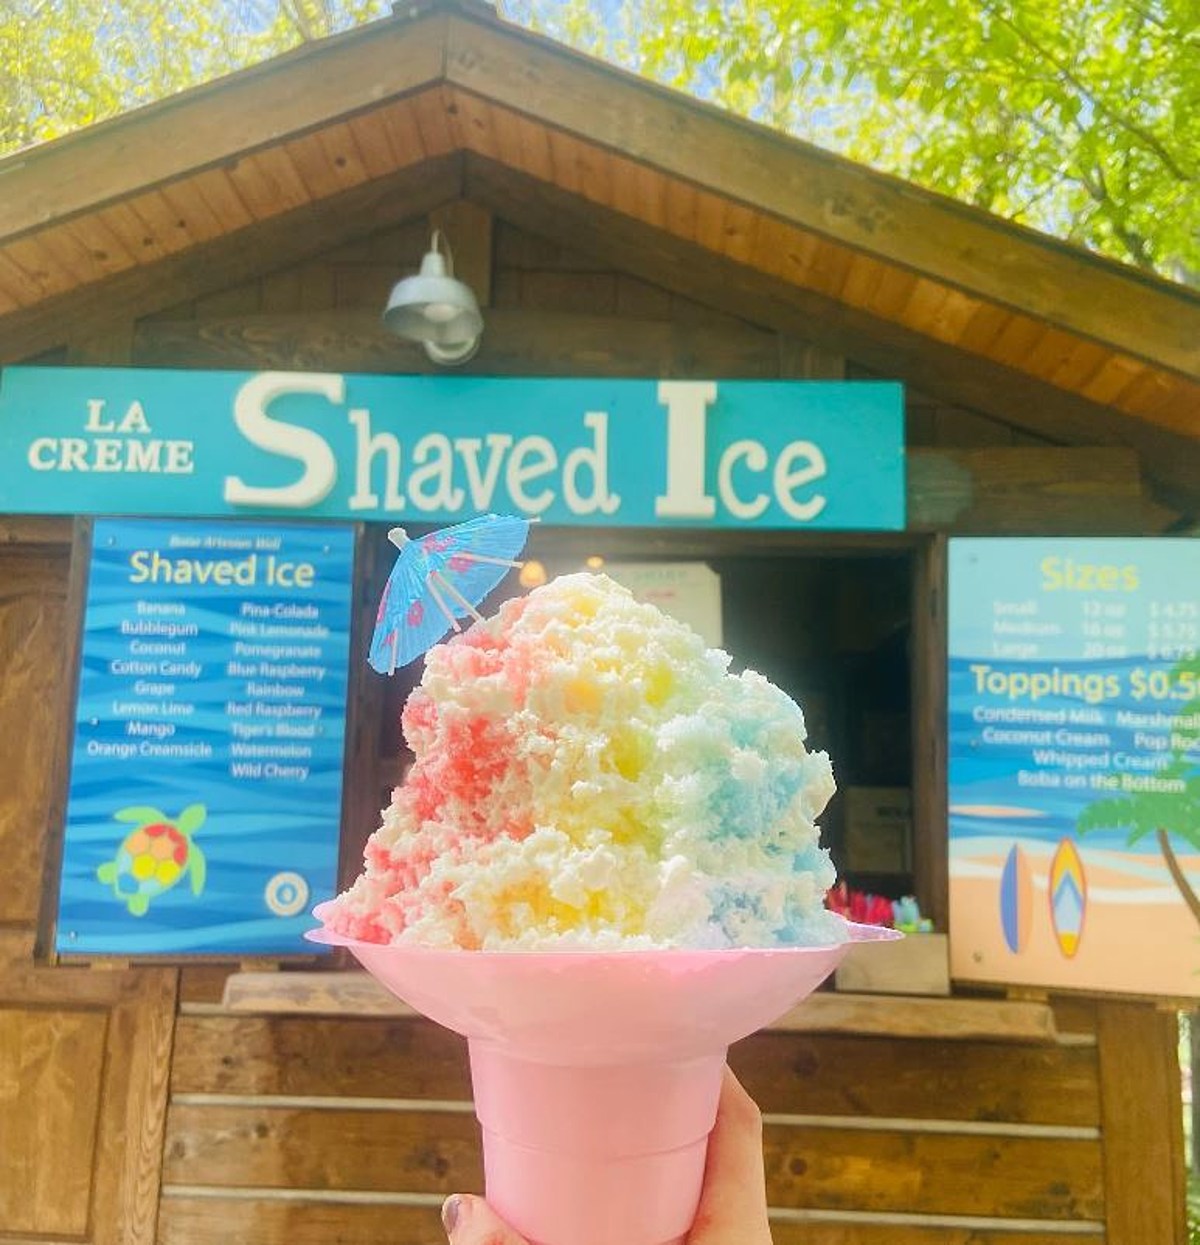 https://townsquare.media/site/659/files/2023/05/attachment-La-Creme-Shaved-Ice-facebook-owner.jpg?w=1200